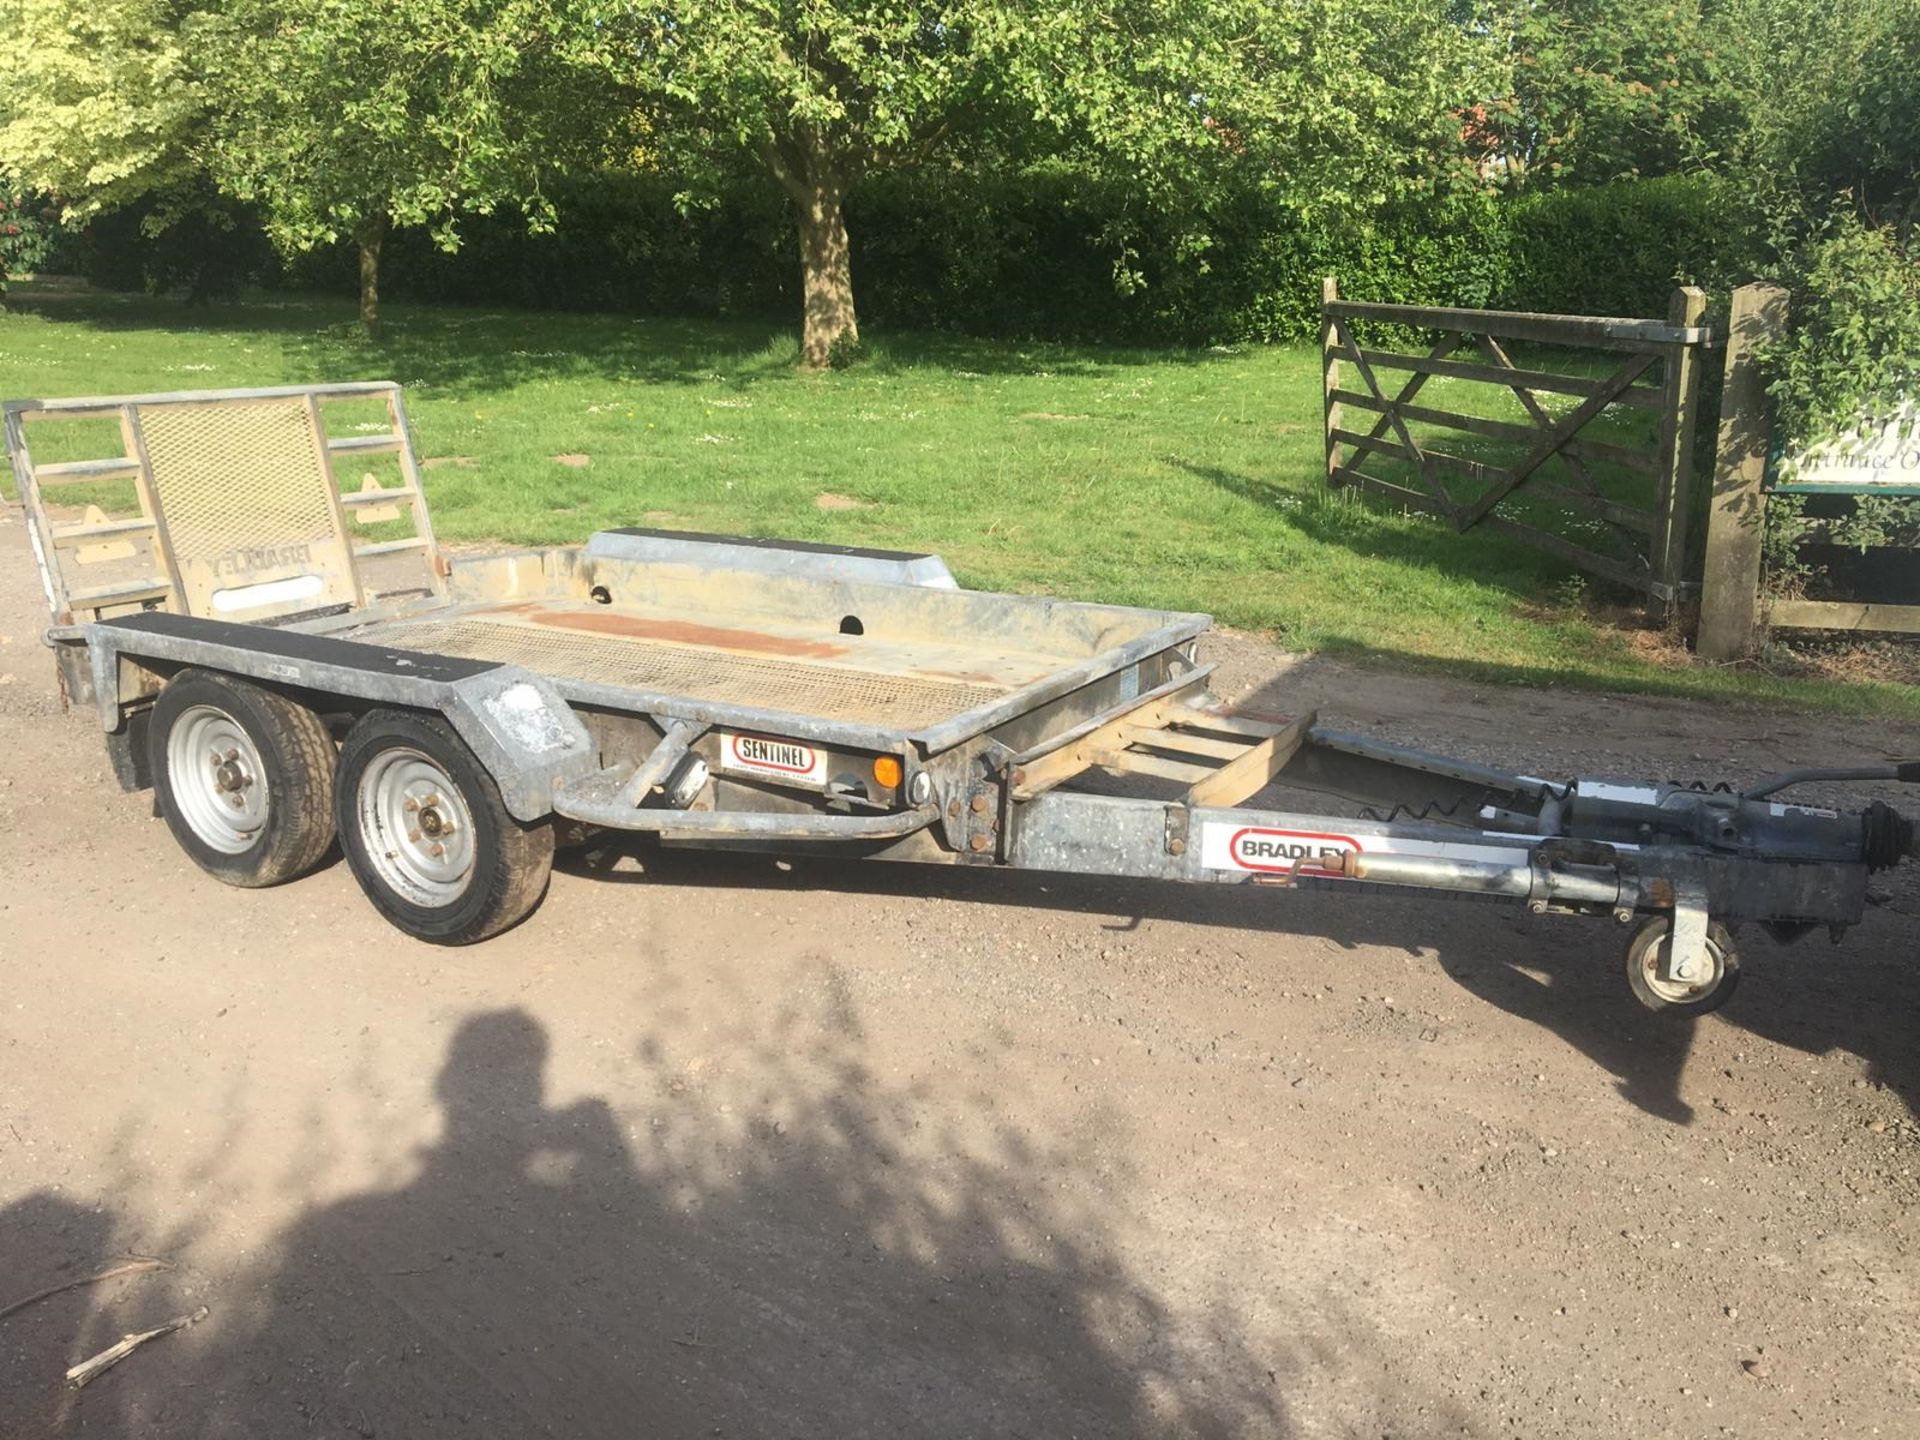 BRADLEY 2.6 ton TWIN AXLE PLANT TRAILER, ALL BRAKES TESTED AND HUBS GREASED, LIGHTS WORK *PLUS VAT*